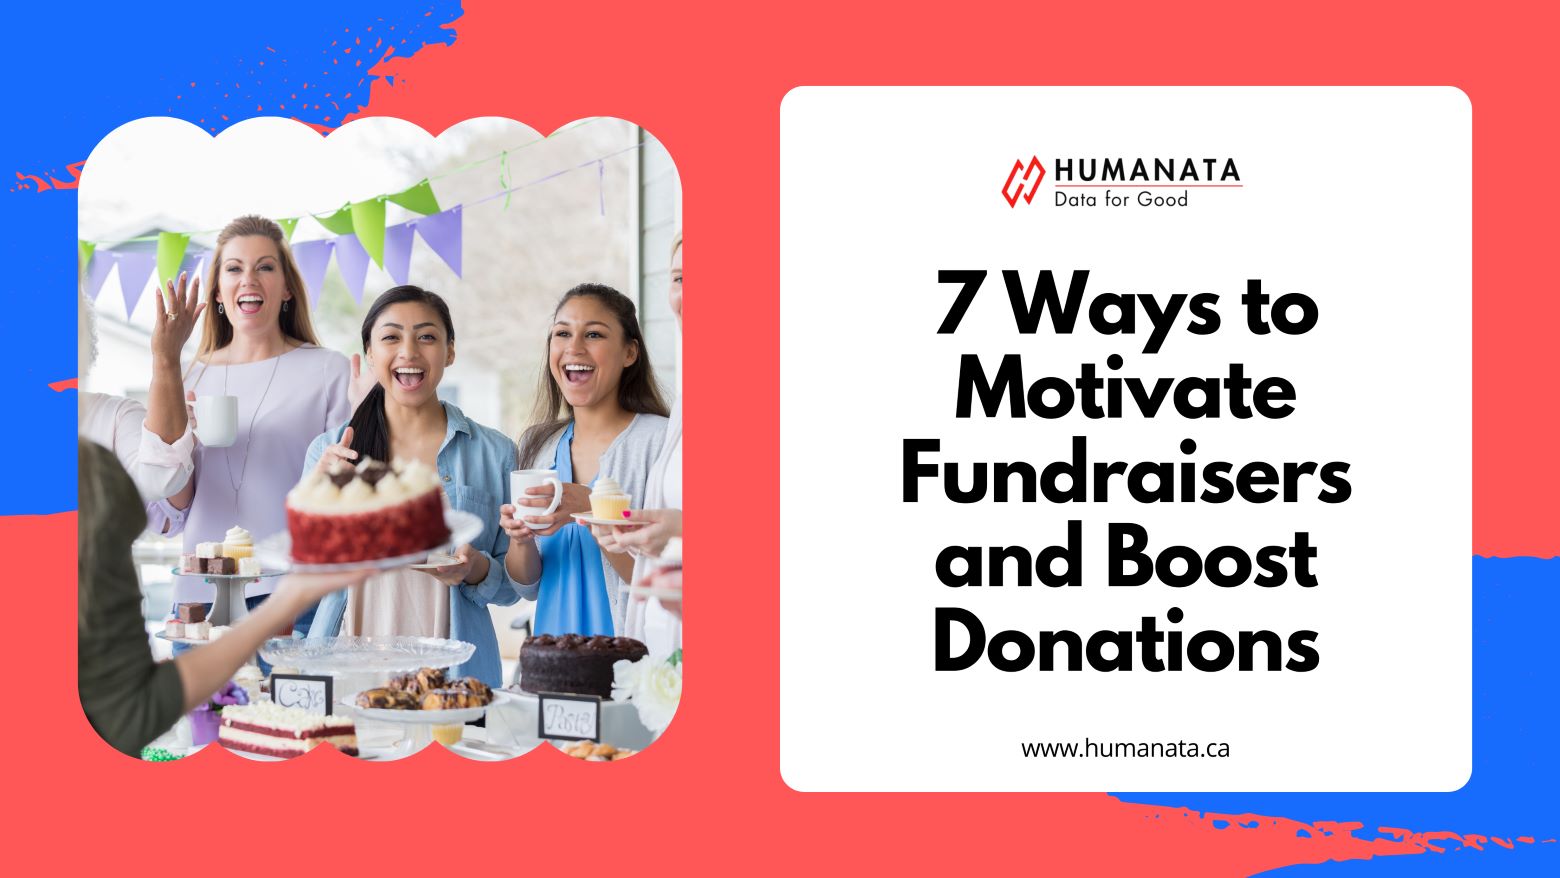 7 Simple Tips to Motivate Fundraisers and Get More Donations